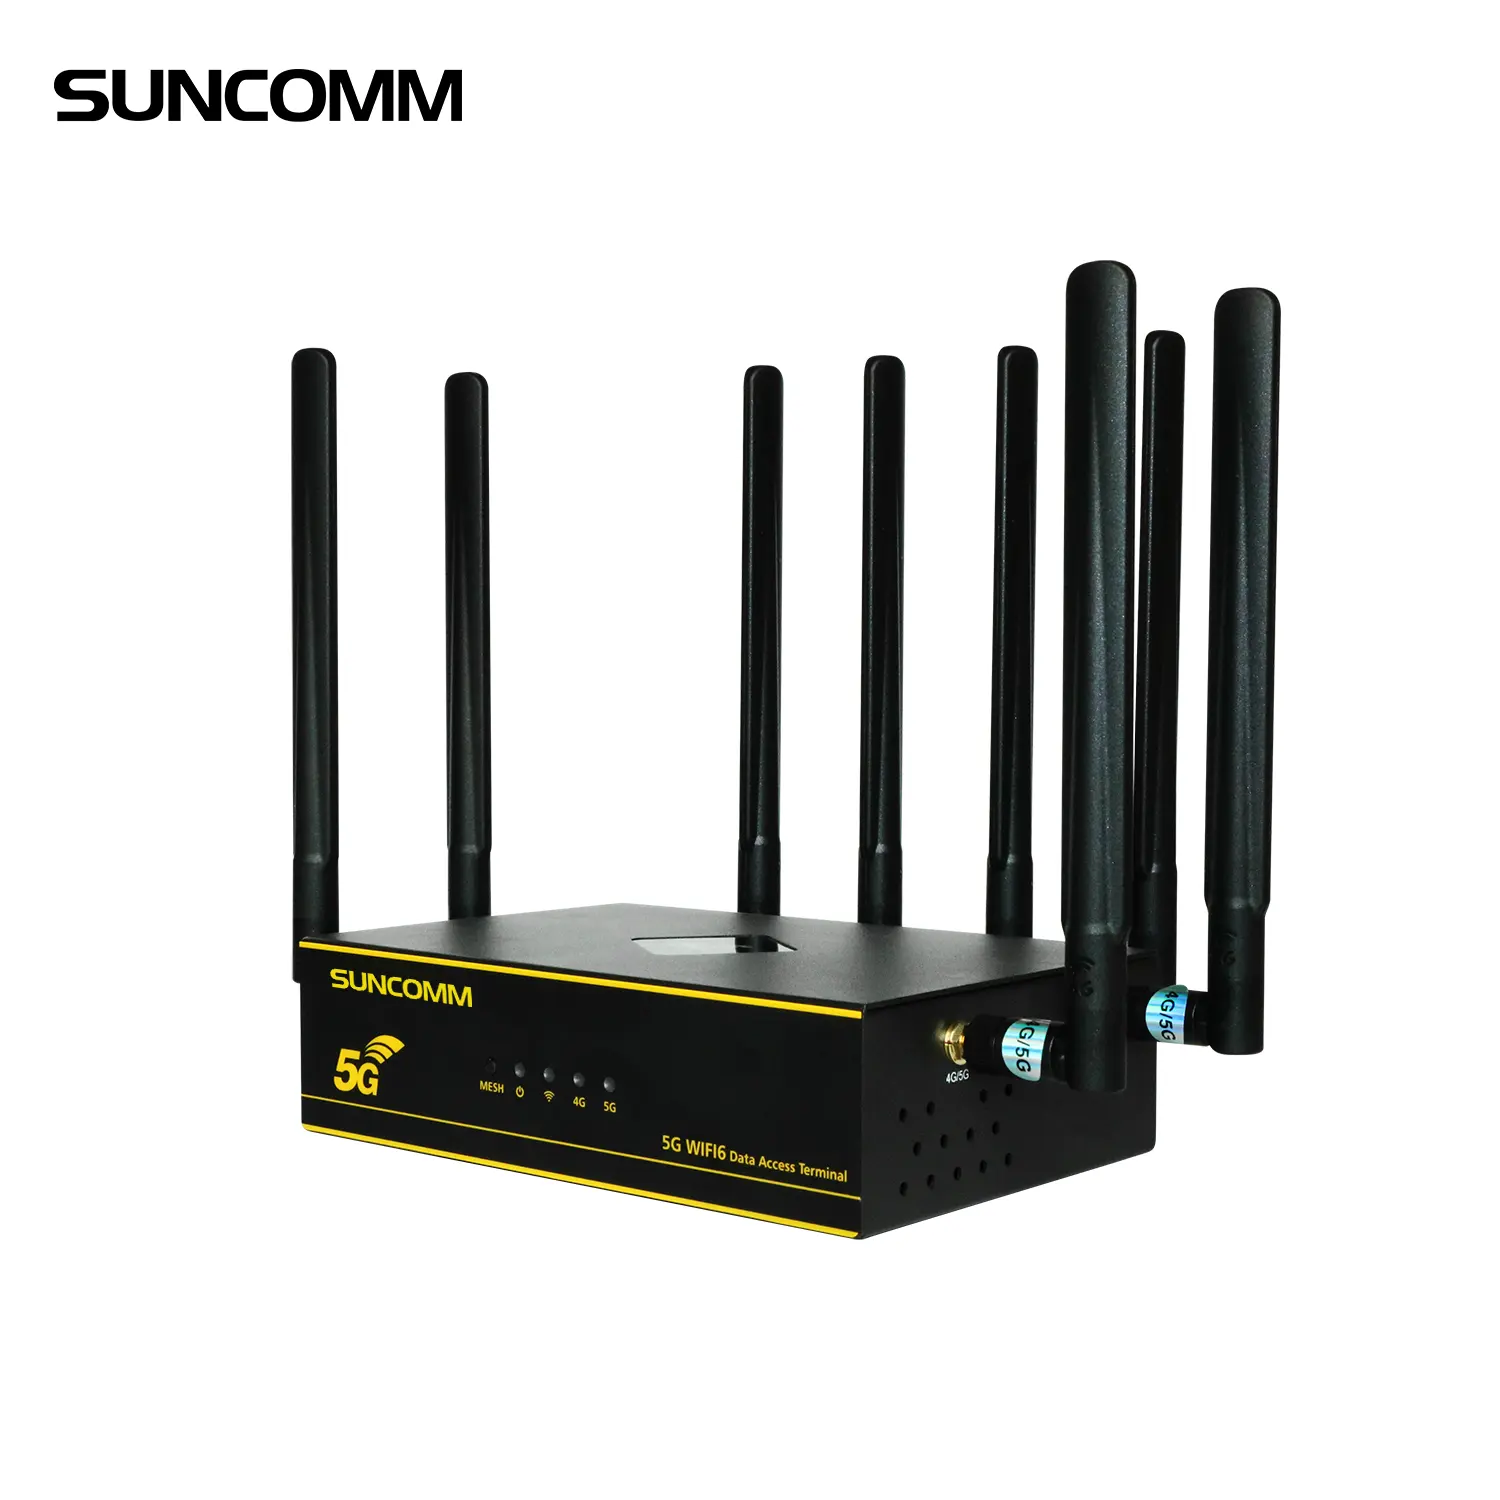 USA hot selling SUNCOMM O1 5G CPE external antenna WIFI 6 modem office t mobile home internet X62 5G router with sim card slot